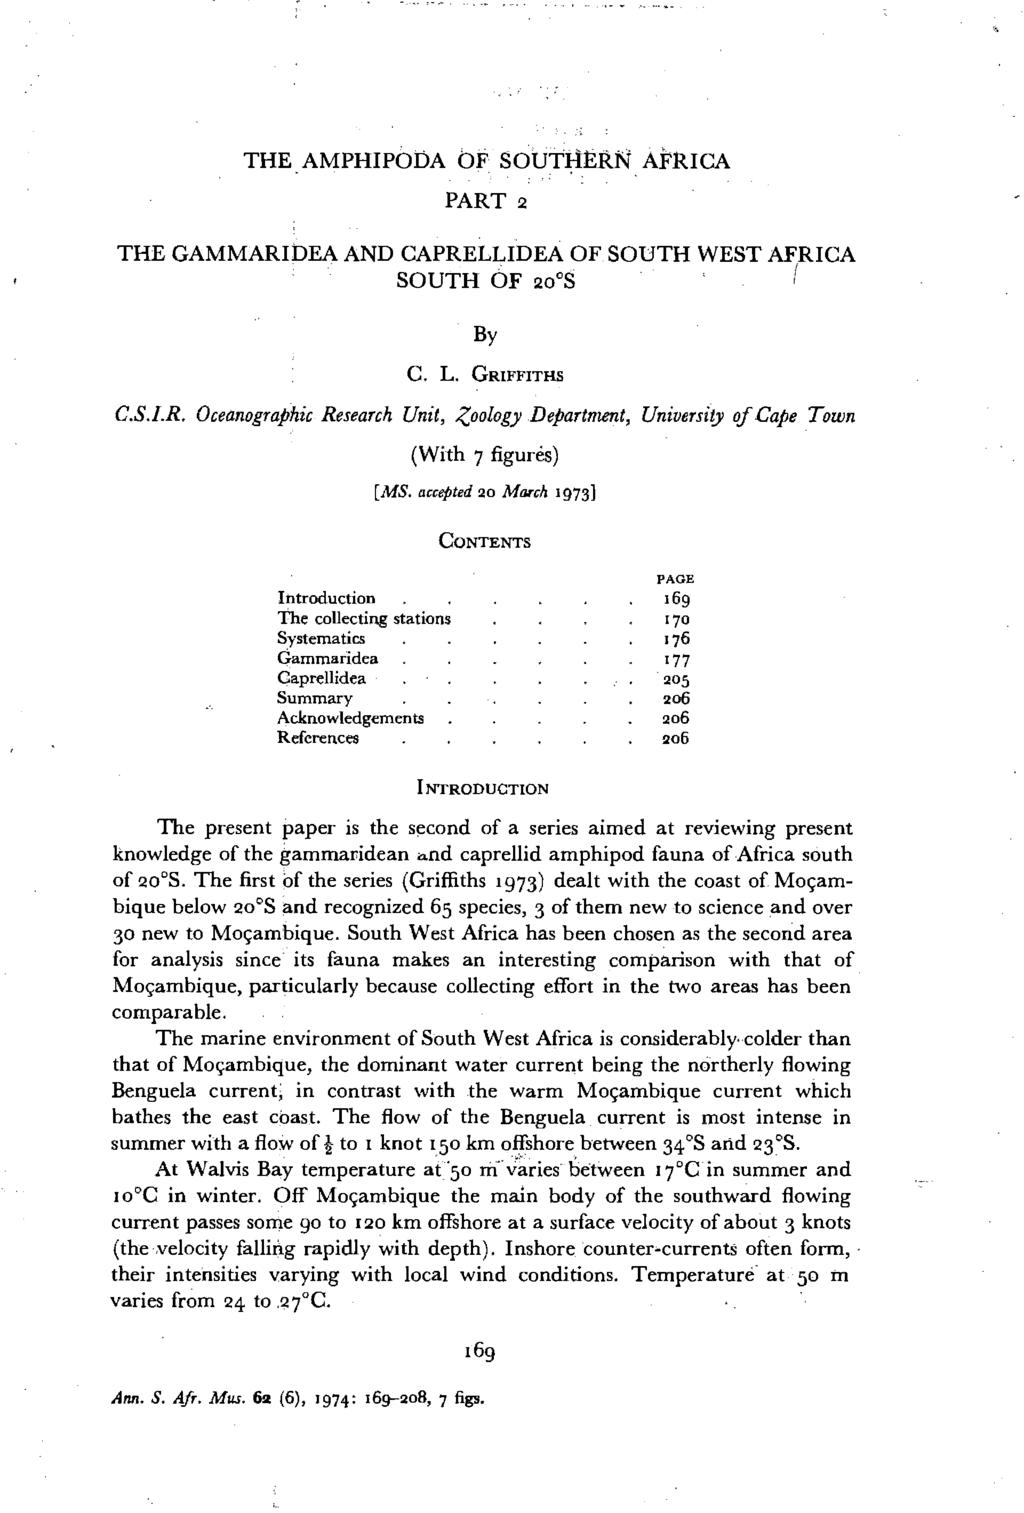 THE. AMPHIPODA bf SOUTHERN APRICA '.,. PART 2 THE GAMMARIDEA AND CAPRELLIDEA OF SOUTH WEST AFRICA SOUTH OF 20 0 S r By C. L. GRIFFITHS C.S.l.R. Oceanographic Research Unit, Zoology Department, University of Cape Town (With 7 figures) [MS.